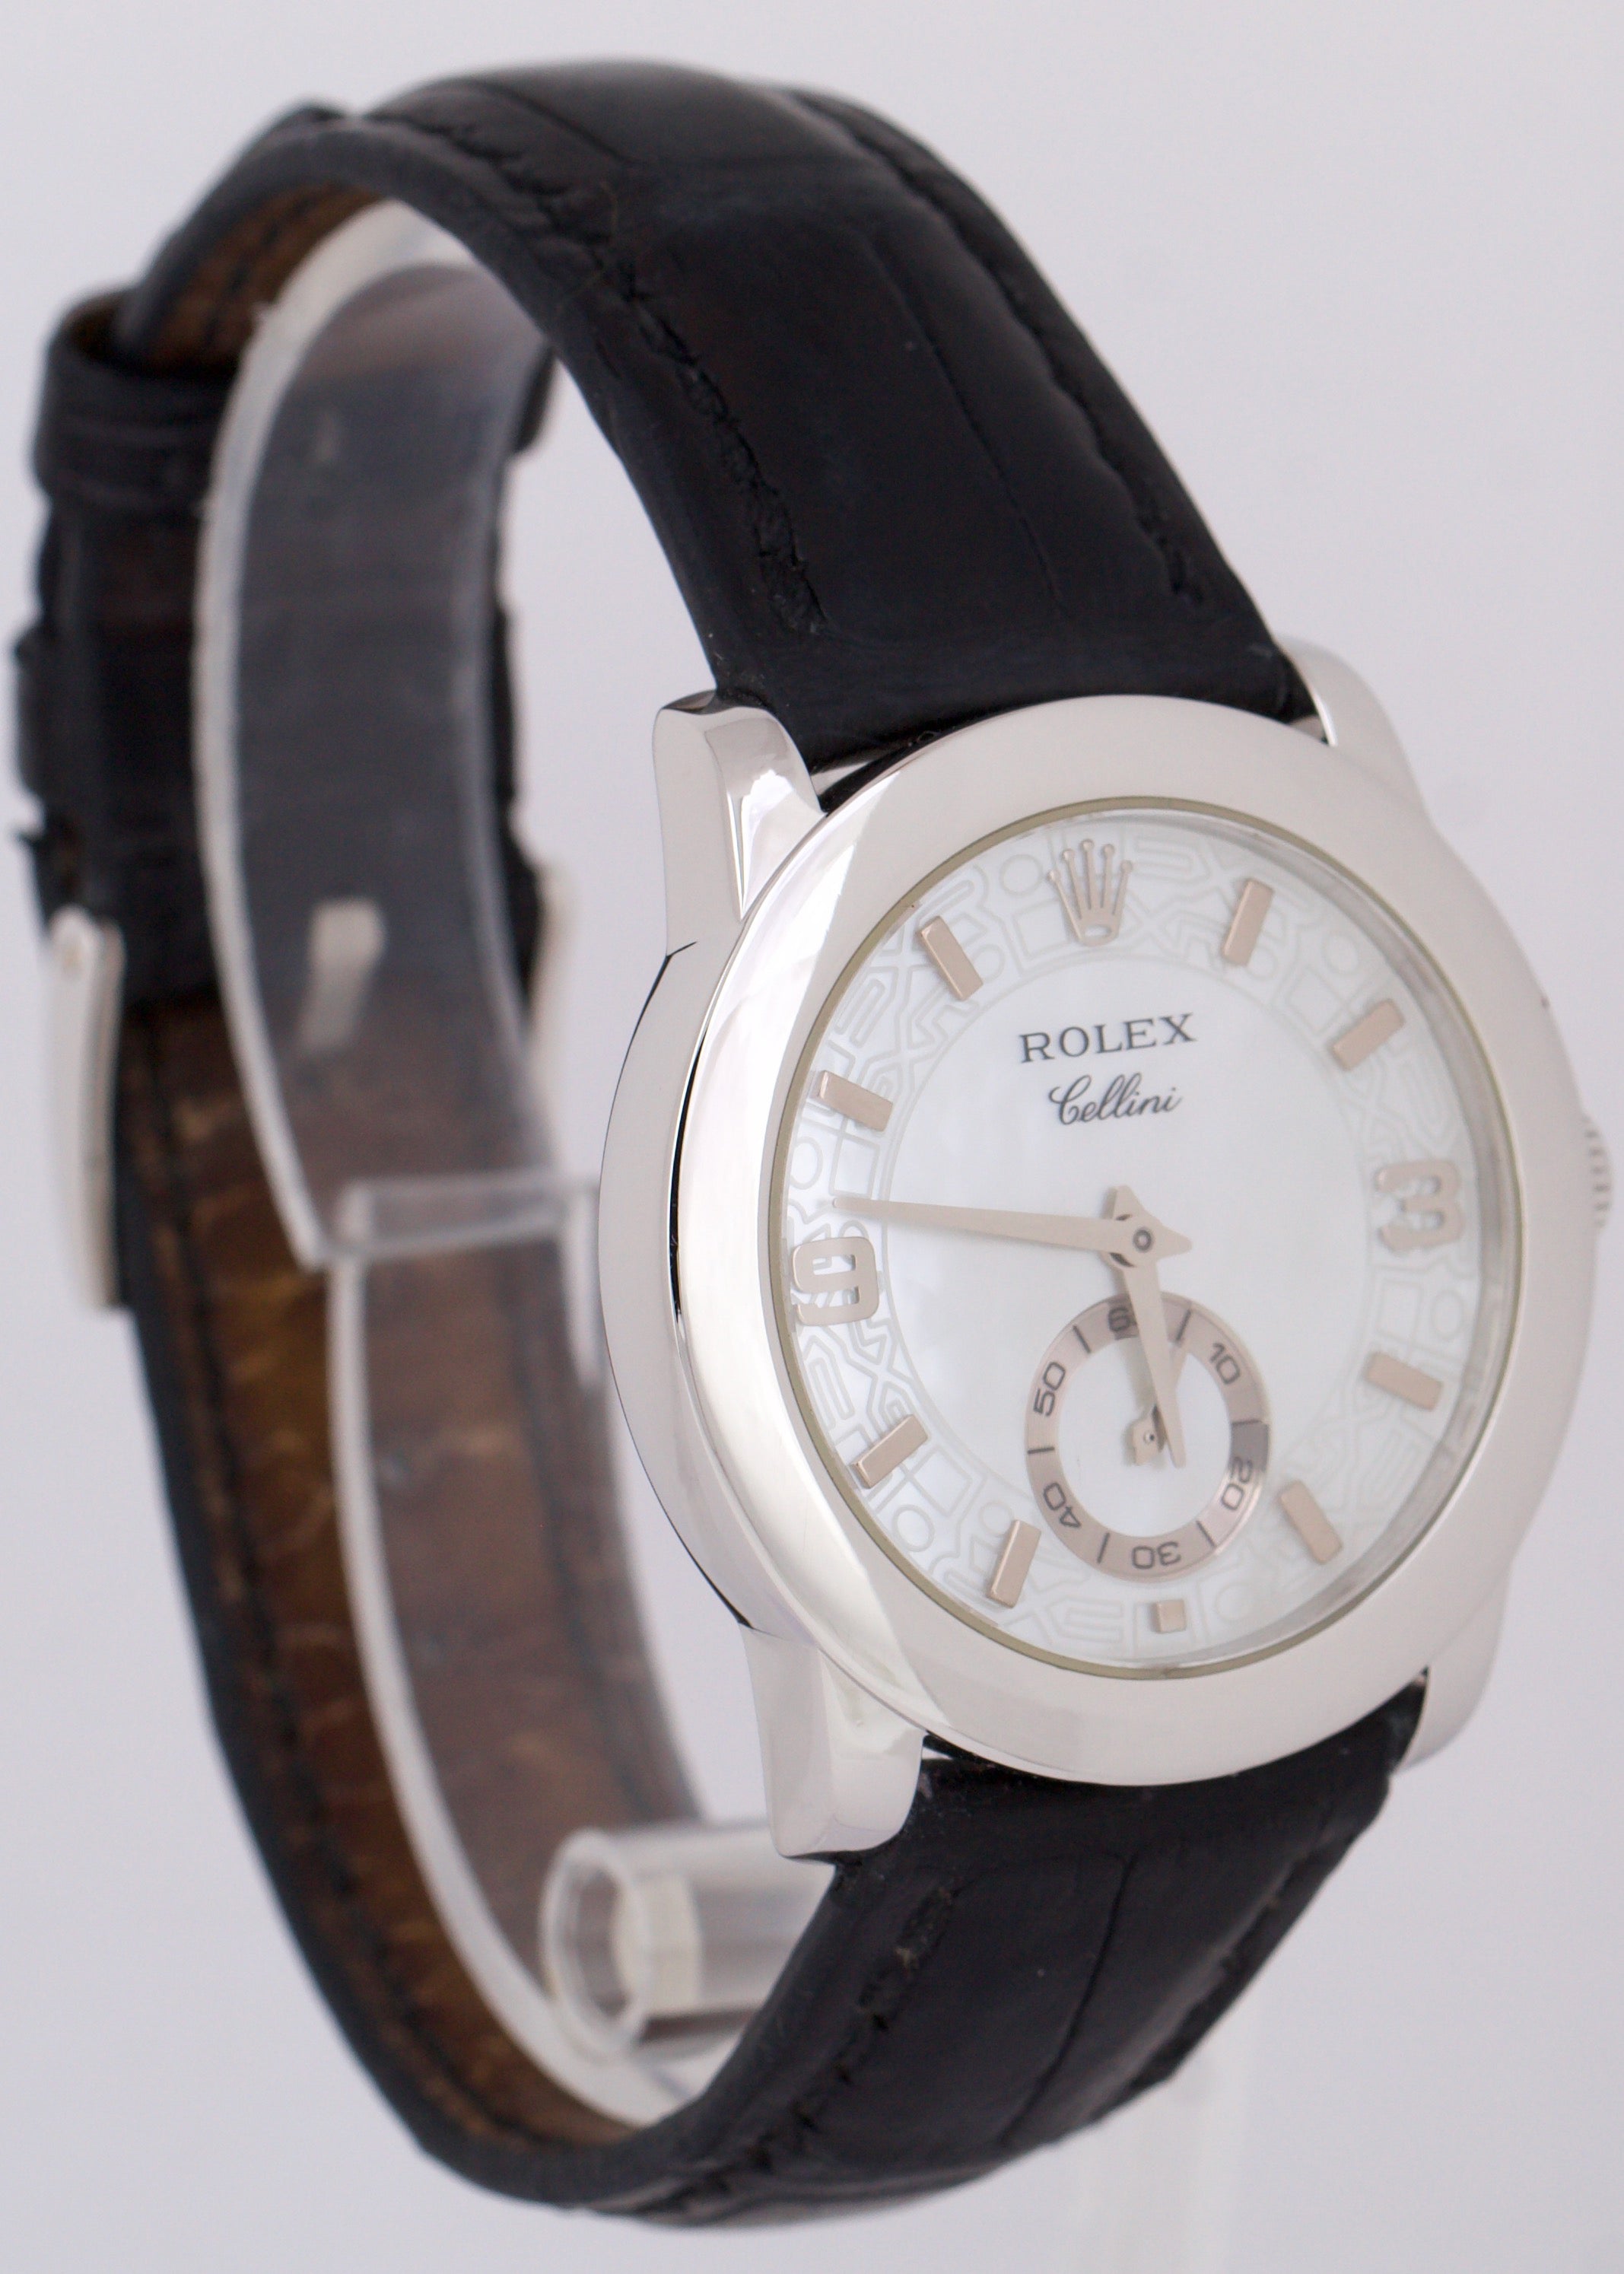 RSC Rolex Cellini Cellinium JUBILEE MOTHER OF PEARL Platinum 35mm 5240/6 Watch